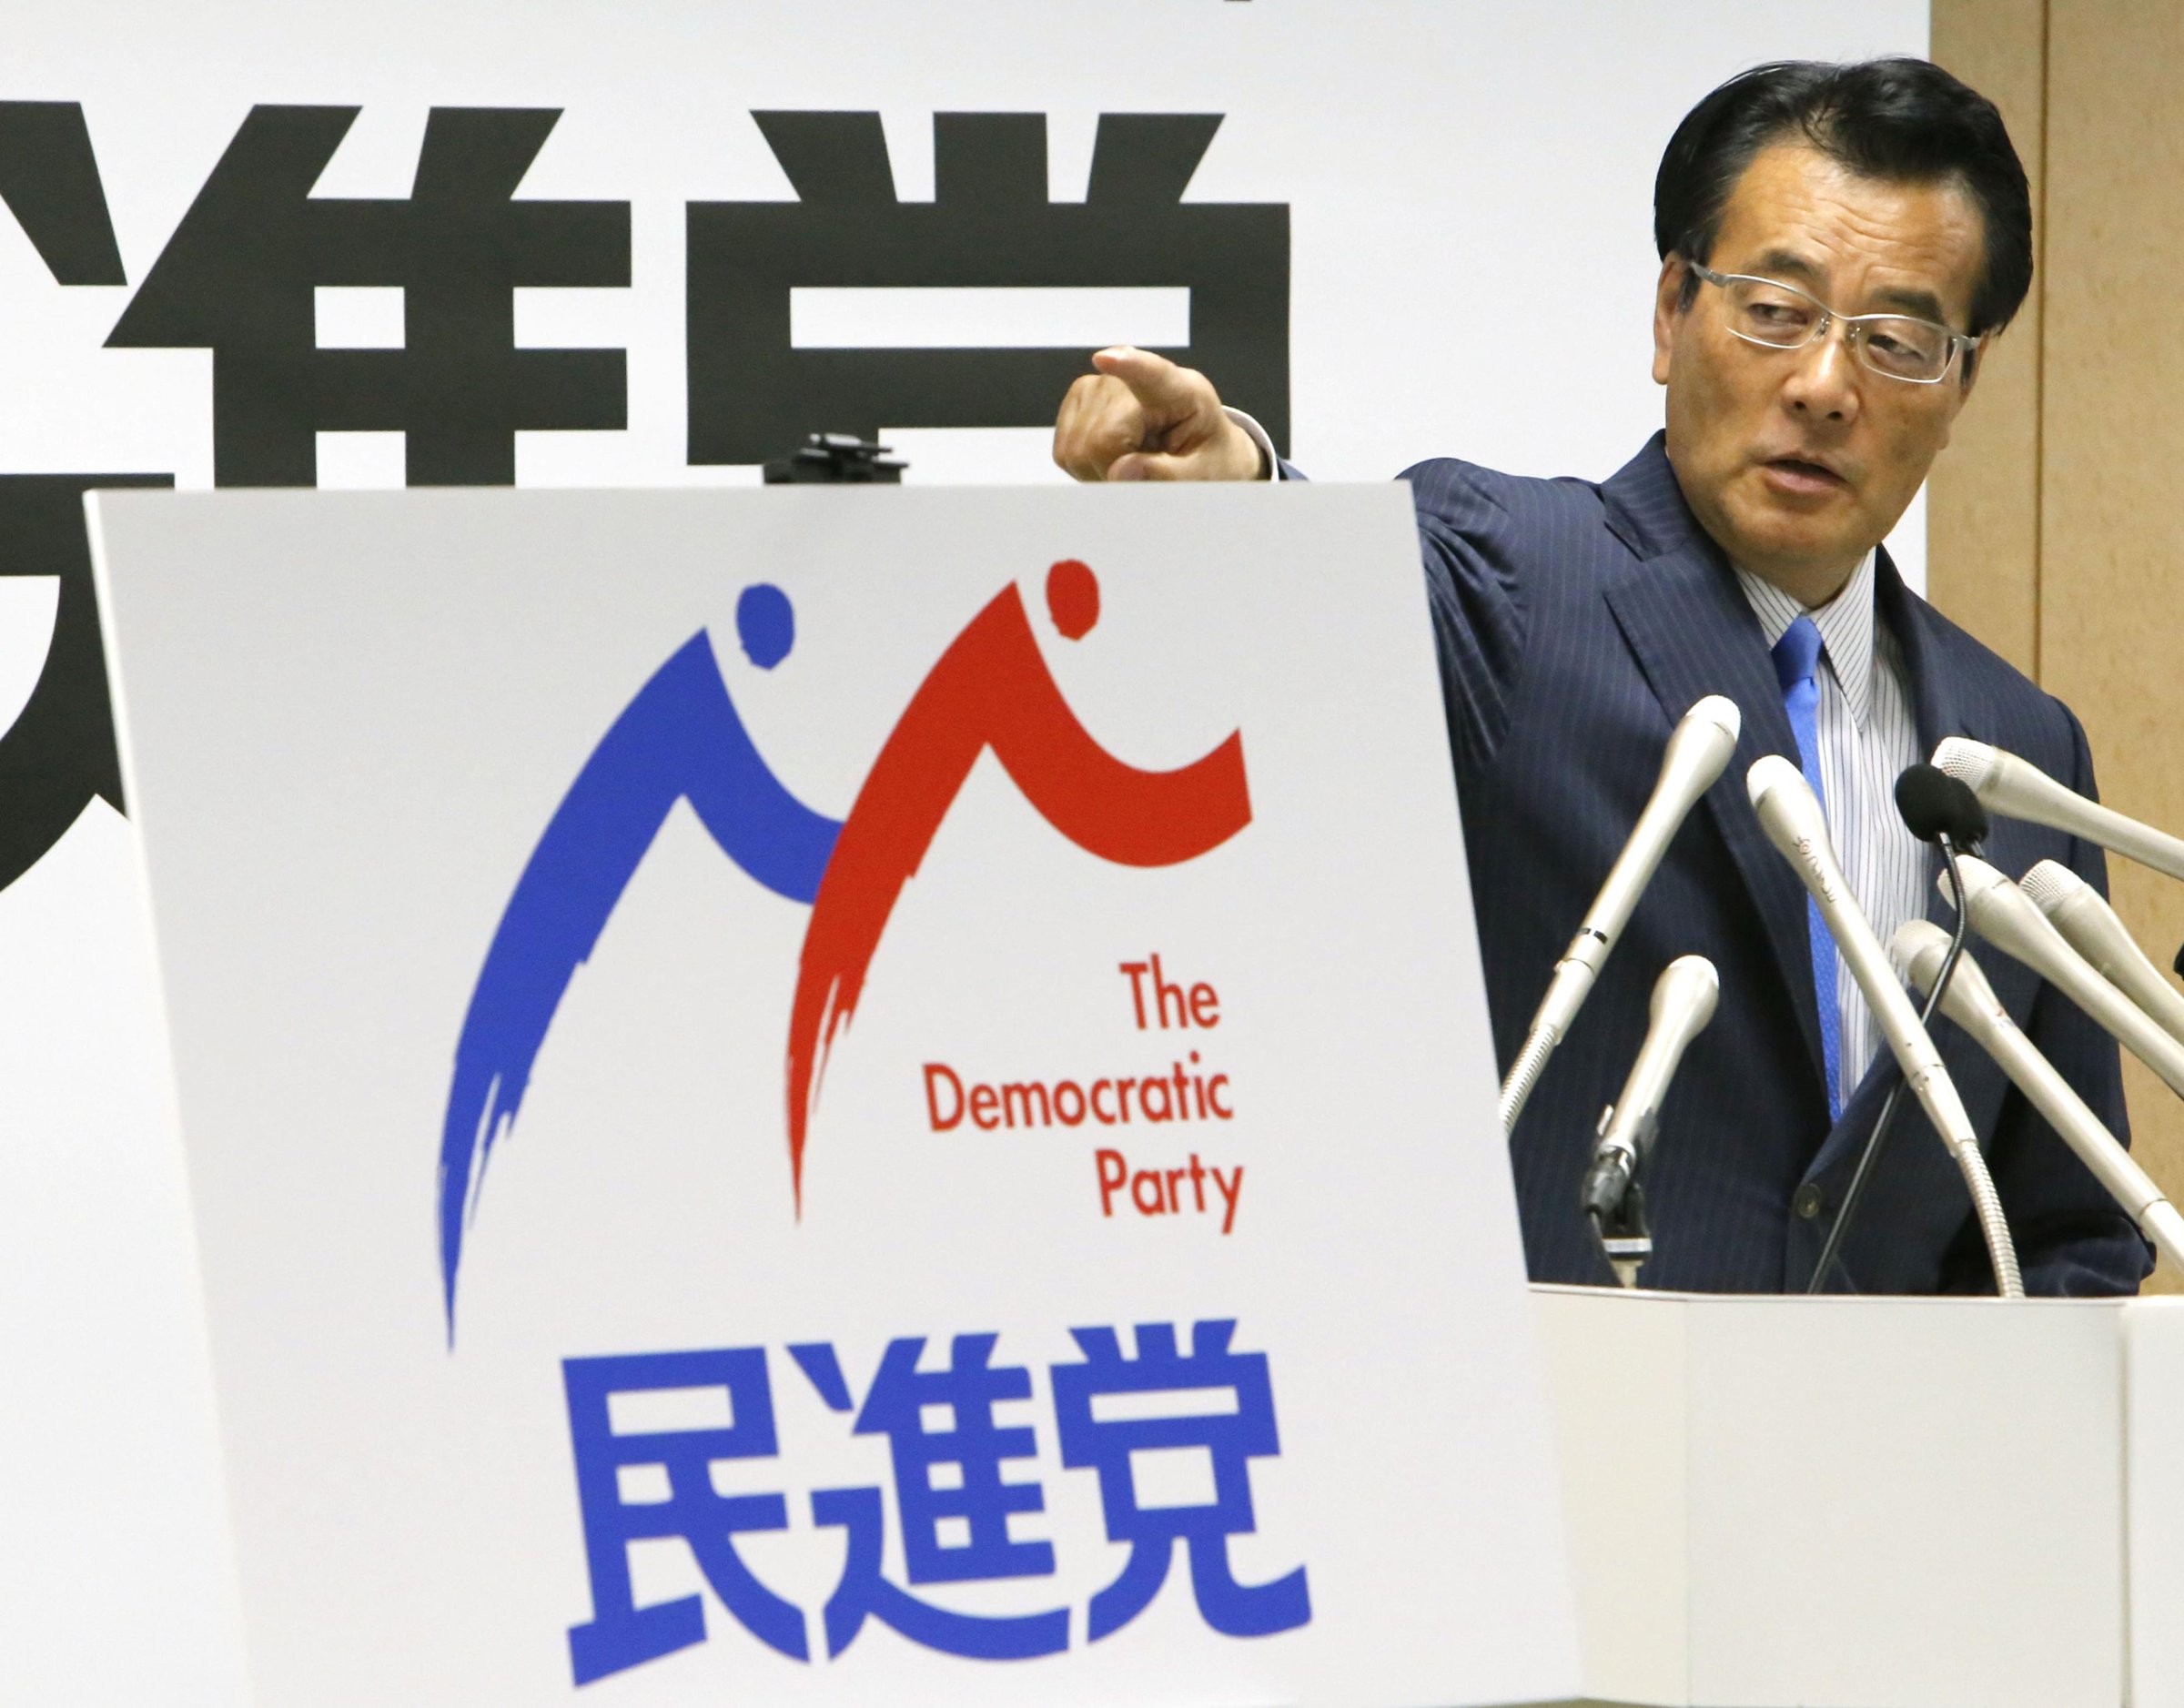 Katsuya Okada, leader of the main opposition Democratic Party, unveils the party's logo at a press conference in Tokyo on May 19, 2016.